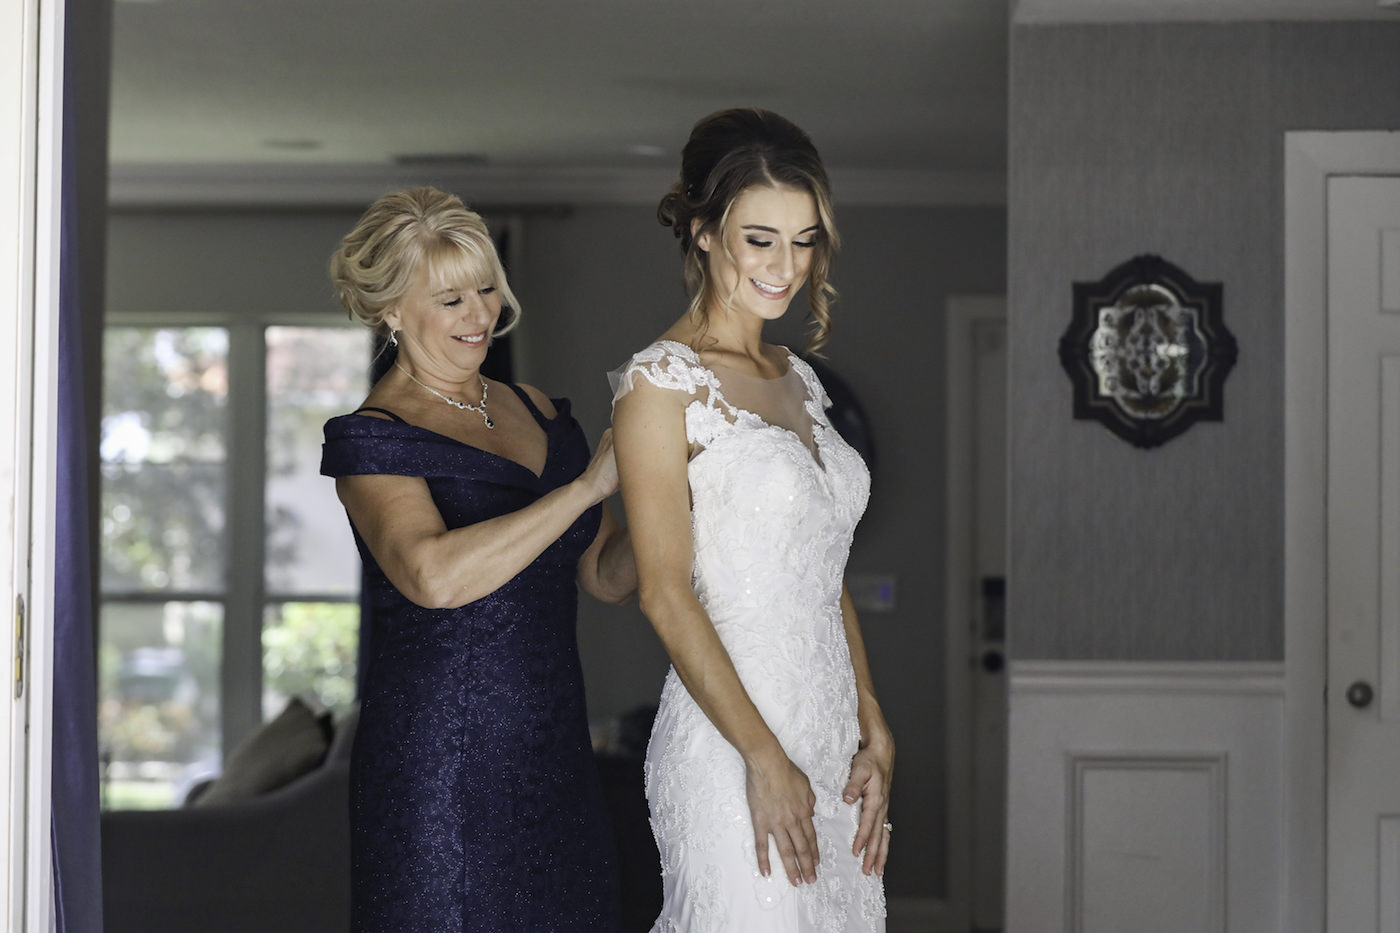 Tampa Bride Getting Ready in Lace and Illusion Neckline with Cap Sleeves Wedding Dress with Mom in Navy Blue Dress Portrait | Wedding Photographer Lifelong Photography Studio